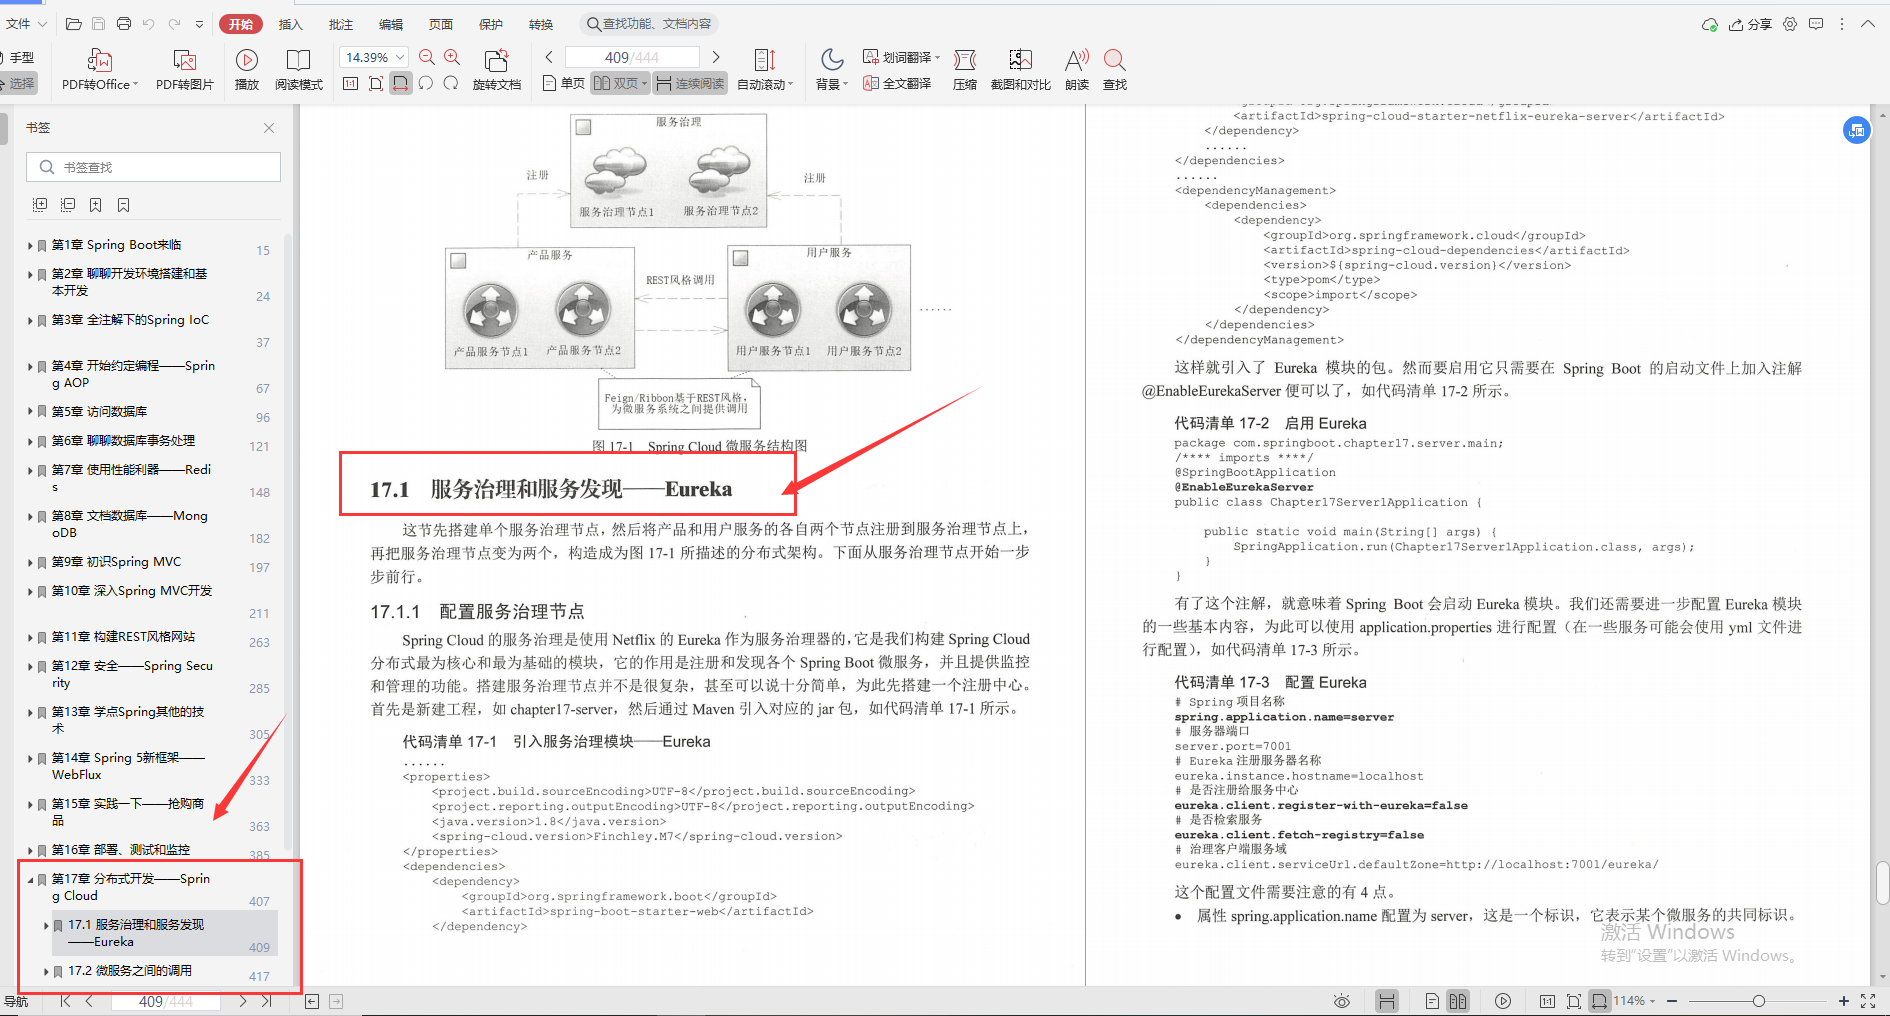 HUAWEI Great God Collector's Edition: SpringBoot's all-you-can-eat notes, everything is too comprehensive